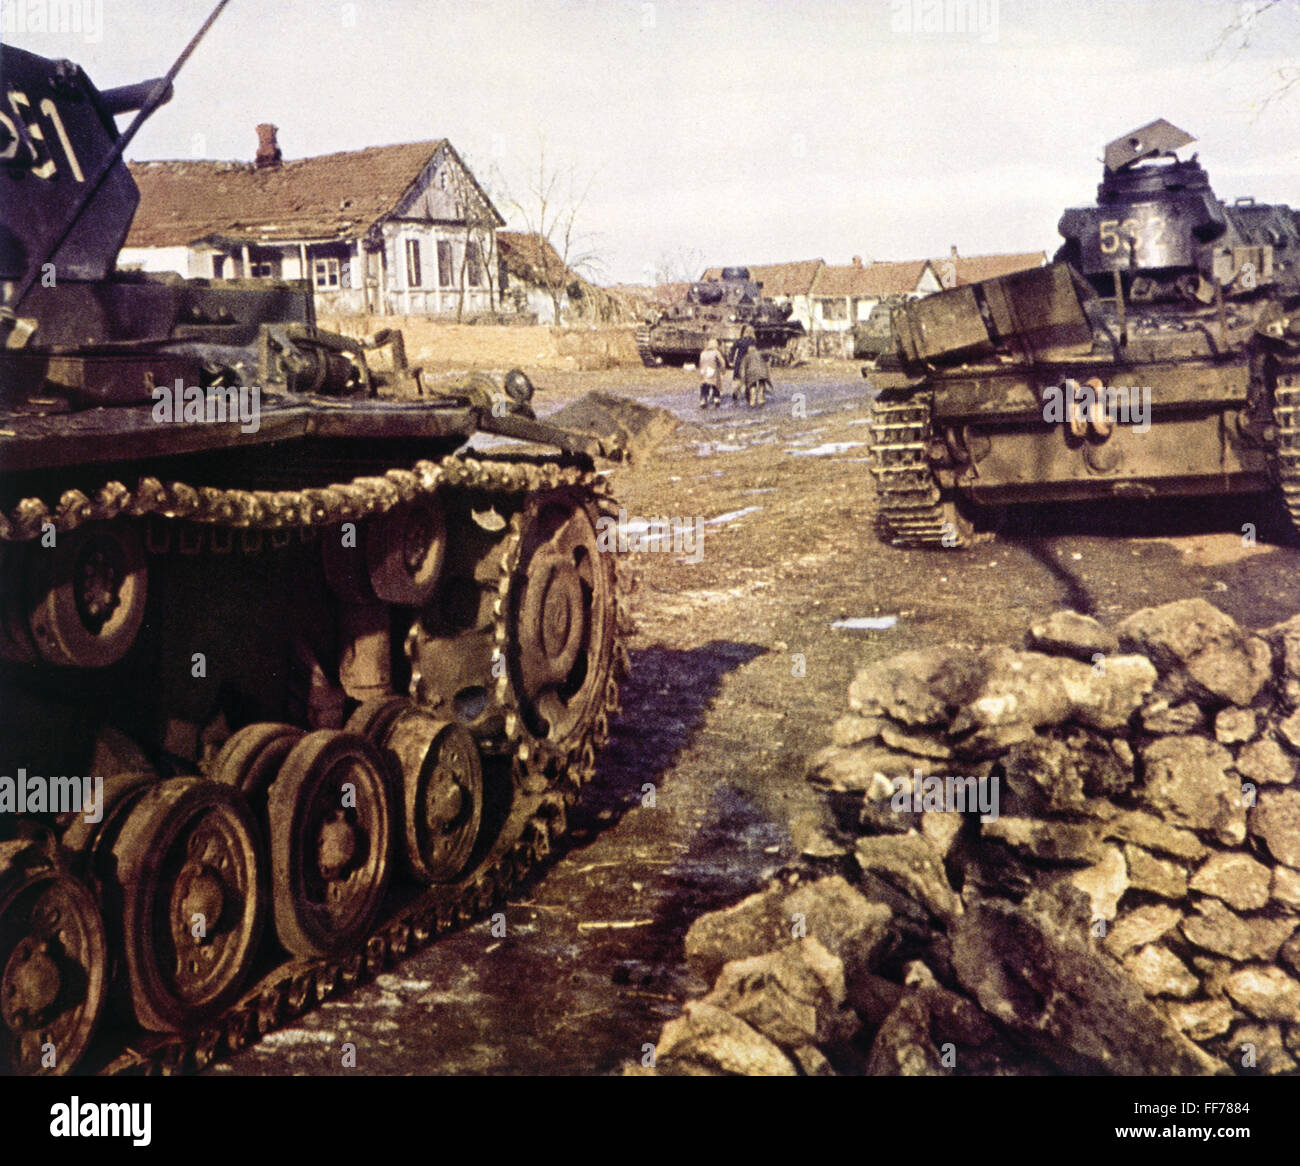 events, Second World War / WWII, Russia 1941, German tank unit resting in a Soviet village, 1941 or 1942, tanks, USSR, Germany, Third Reich, Wehrmacht, Eastern Front, PzKw III, IV, P, Soviet Union, 20th century, historic, historical, people, 1940s, Additional-Rights-Clearences-Not Available Stock Photo